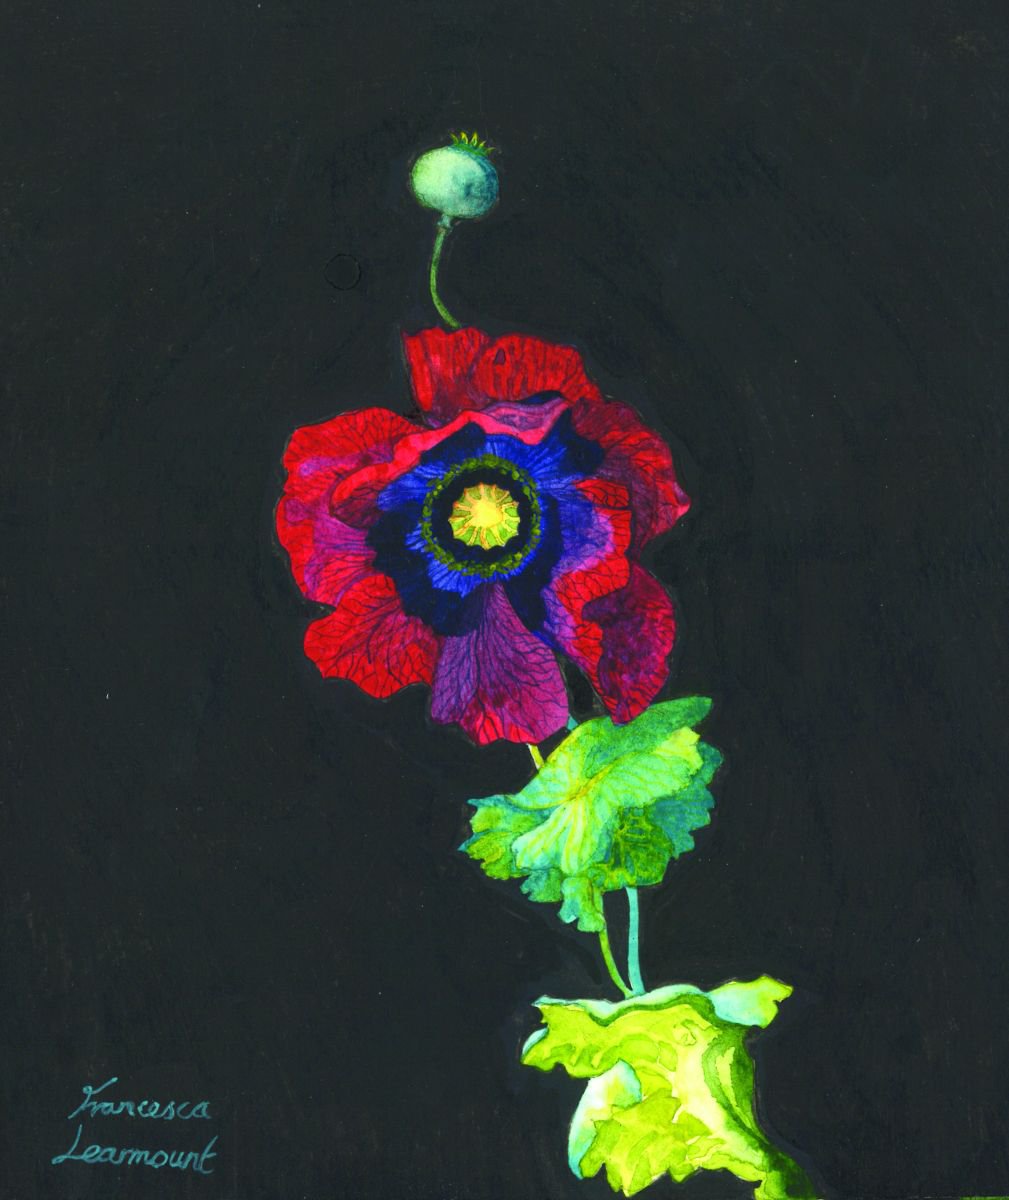 Small Poppy by Francesca Learmount at Cicca-Art